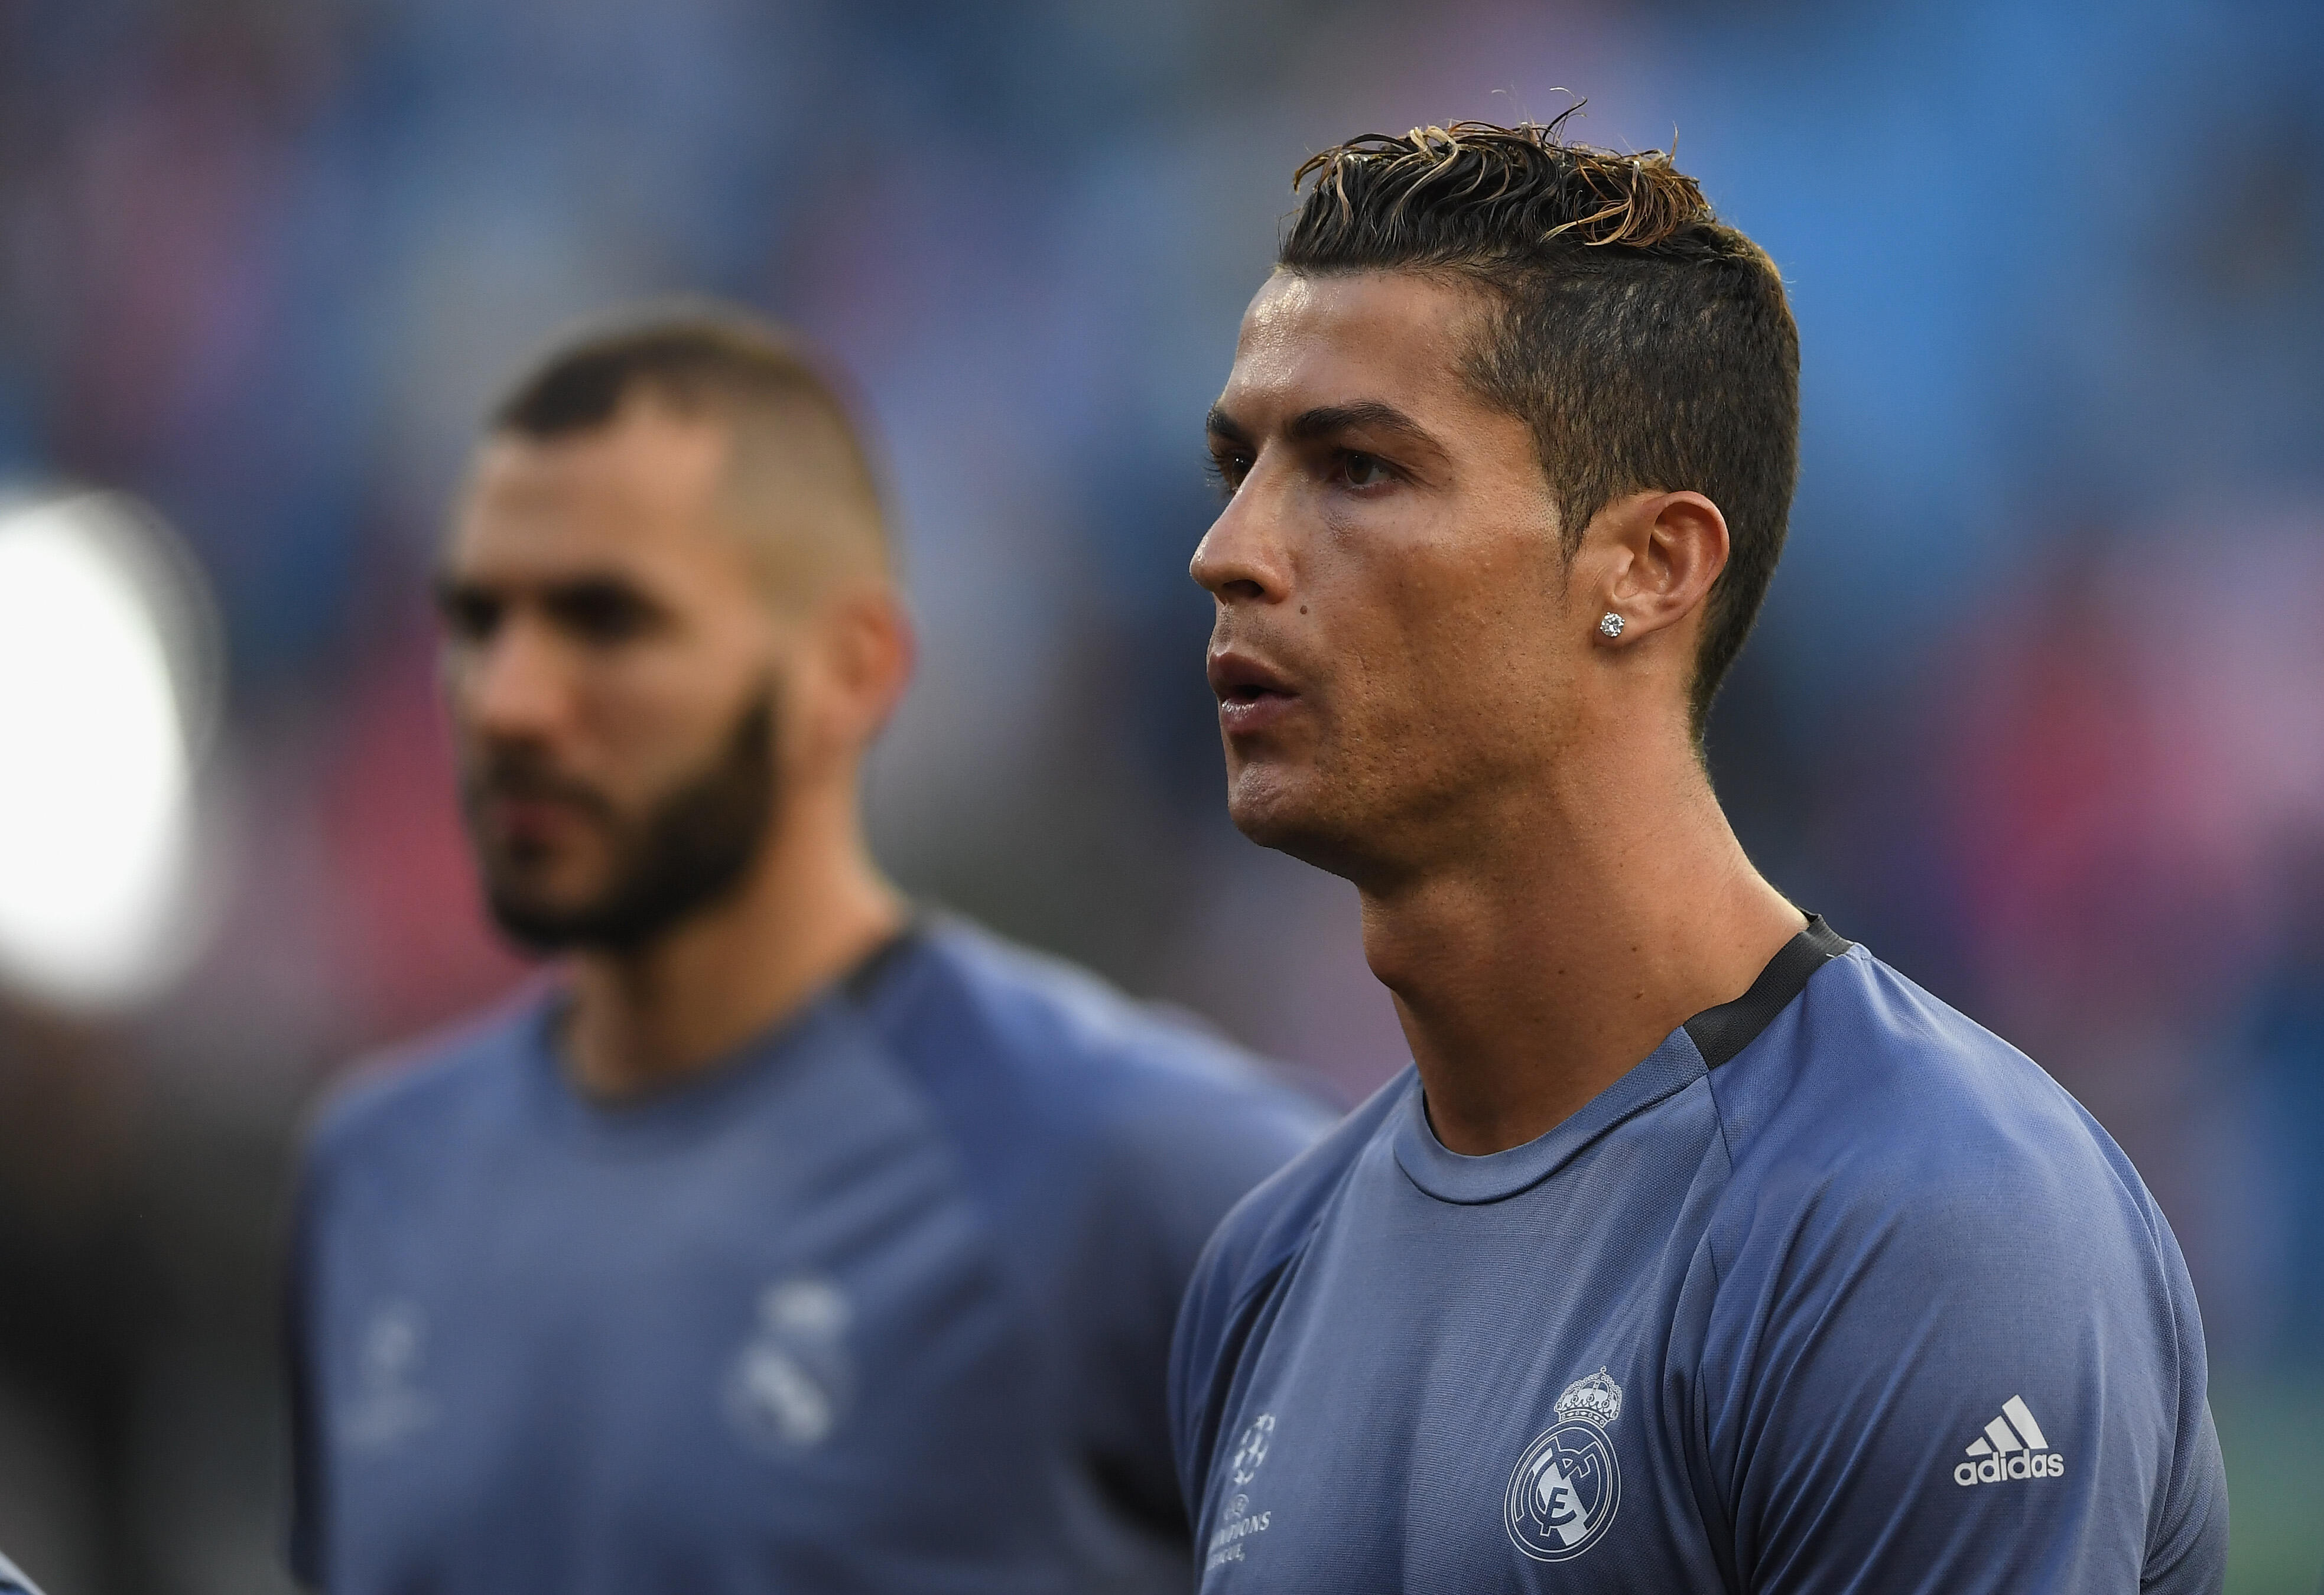 MADRID, SPAIN - MAY 10:  Cristiano Ronaldo of Real Madrid looks on prior to the UEFA Champions League Semi Final second leg match between Club Atletico de Madrid and Real Madrid CF at Vicente Calderon Stadium on May 10, 2017 in Madrid, Spain.  (Photo by L